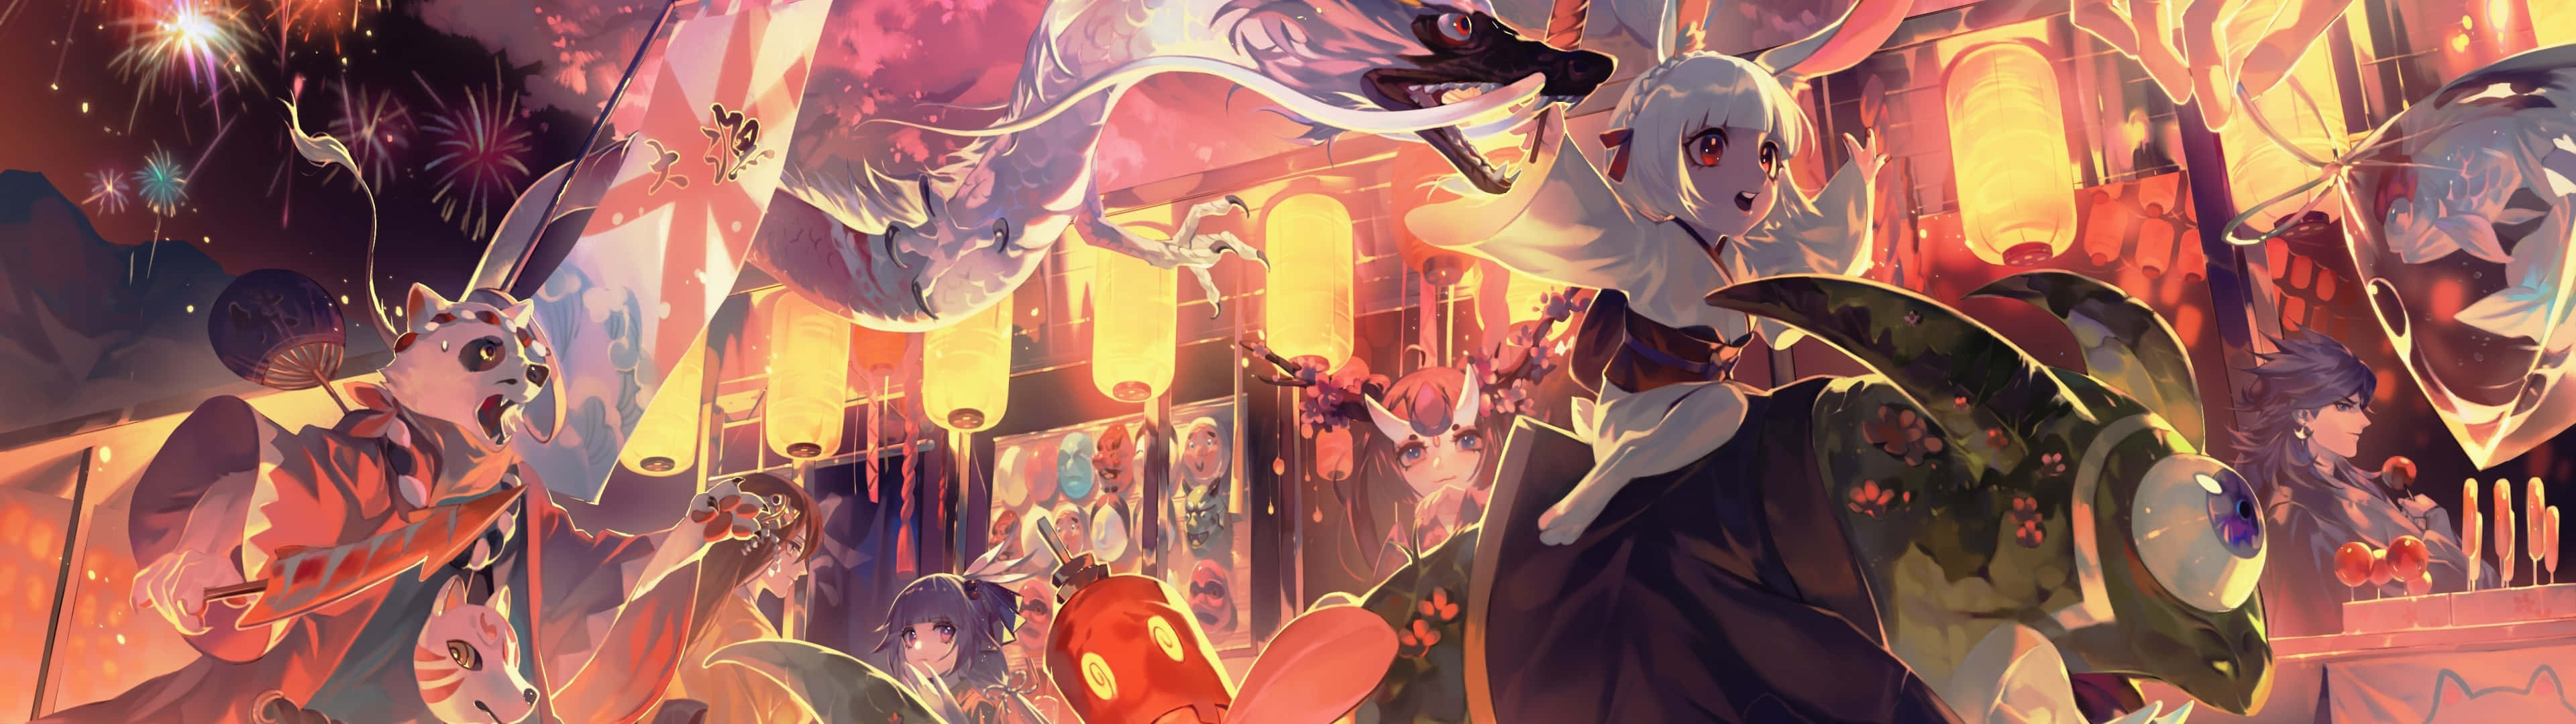 Beautiful Surreal Underwater Cloudy Anime Girl and Goldfish